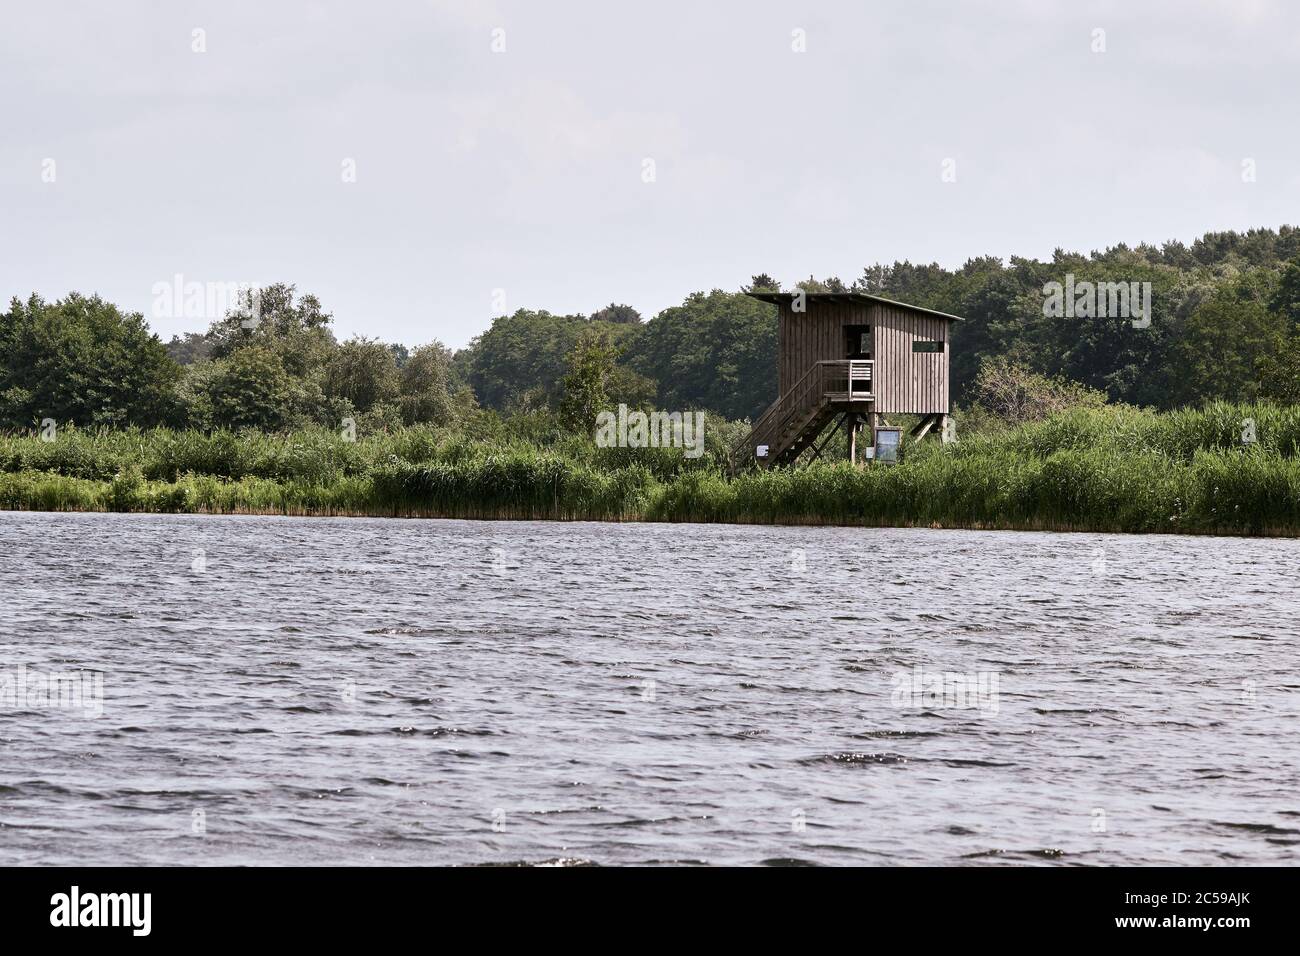 Bird blind and grassy landscape at nature reserve 'Meißendorf Lakes and Bannetze Moor' in Winsen, Germany Stock Photo